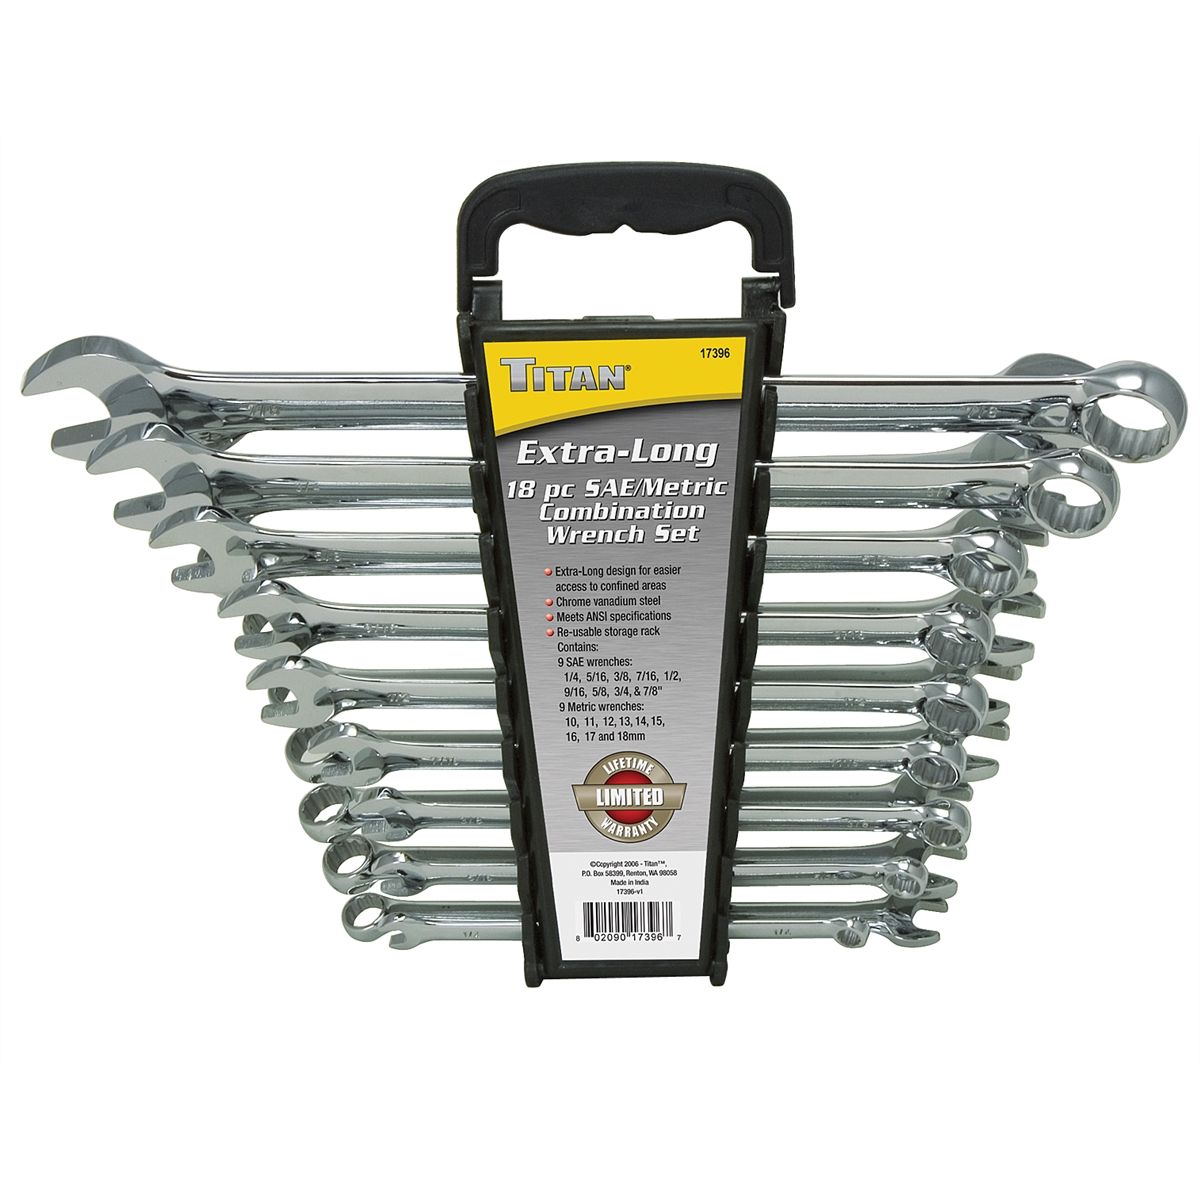 18 pc Extra Long Wrench Set